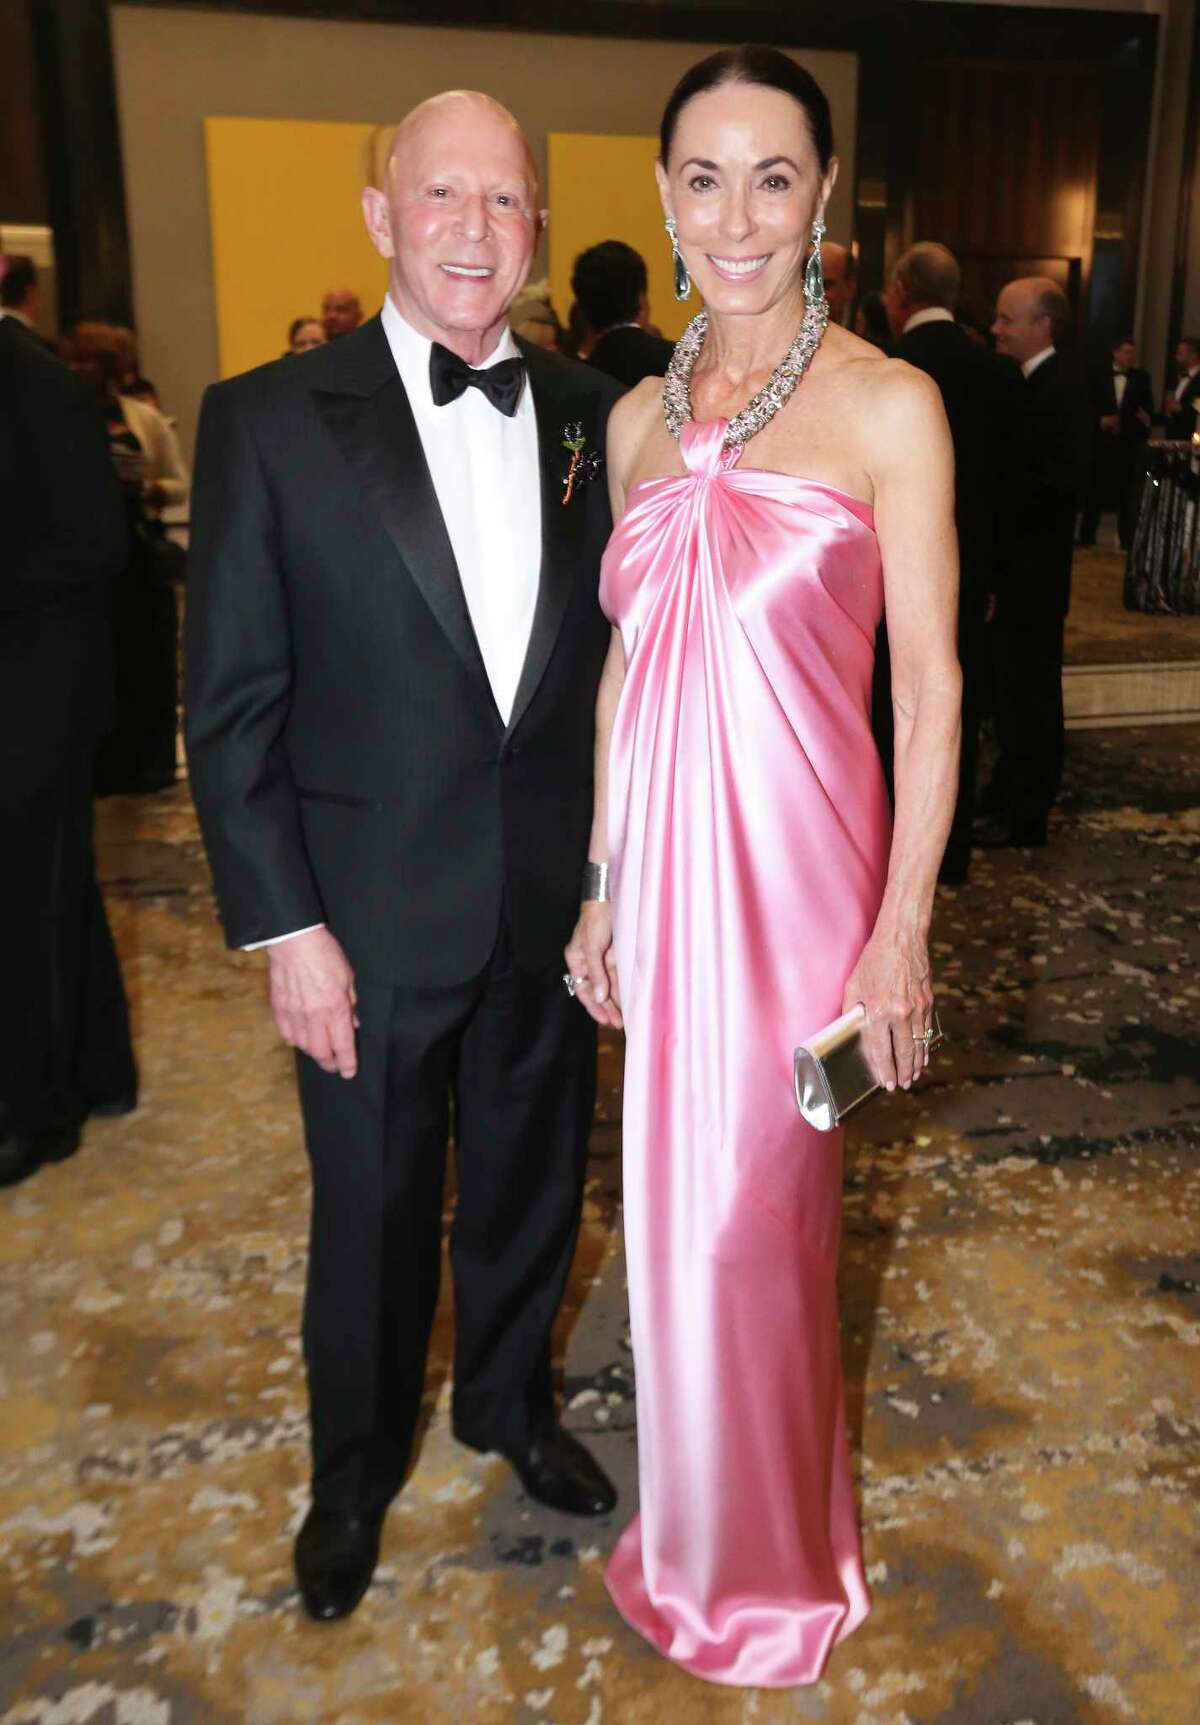 Lester and Sue Smith will co-chair the 2019 Houston Chronicle Best Dressed Luncheon and Neiman Marcus Fashion Presentation. The luncheon will be held Thursday, March 28, 2019, at The Post Oak at Uptown.  If the luncheon raises $1 million, they will match it with a $1 million grant.